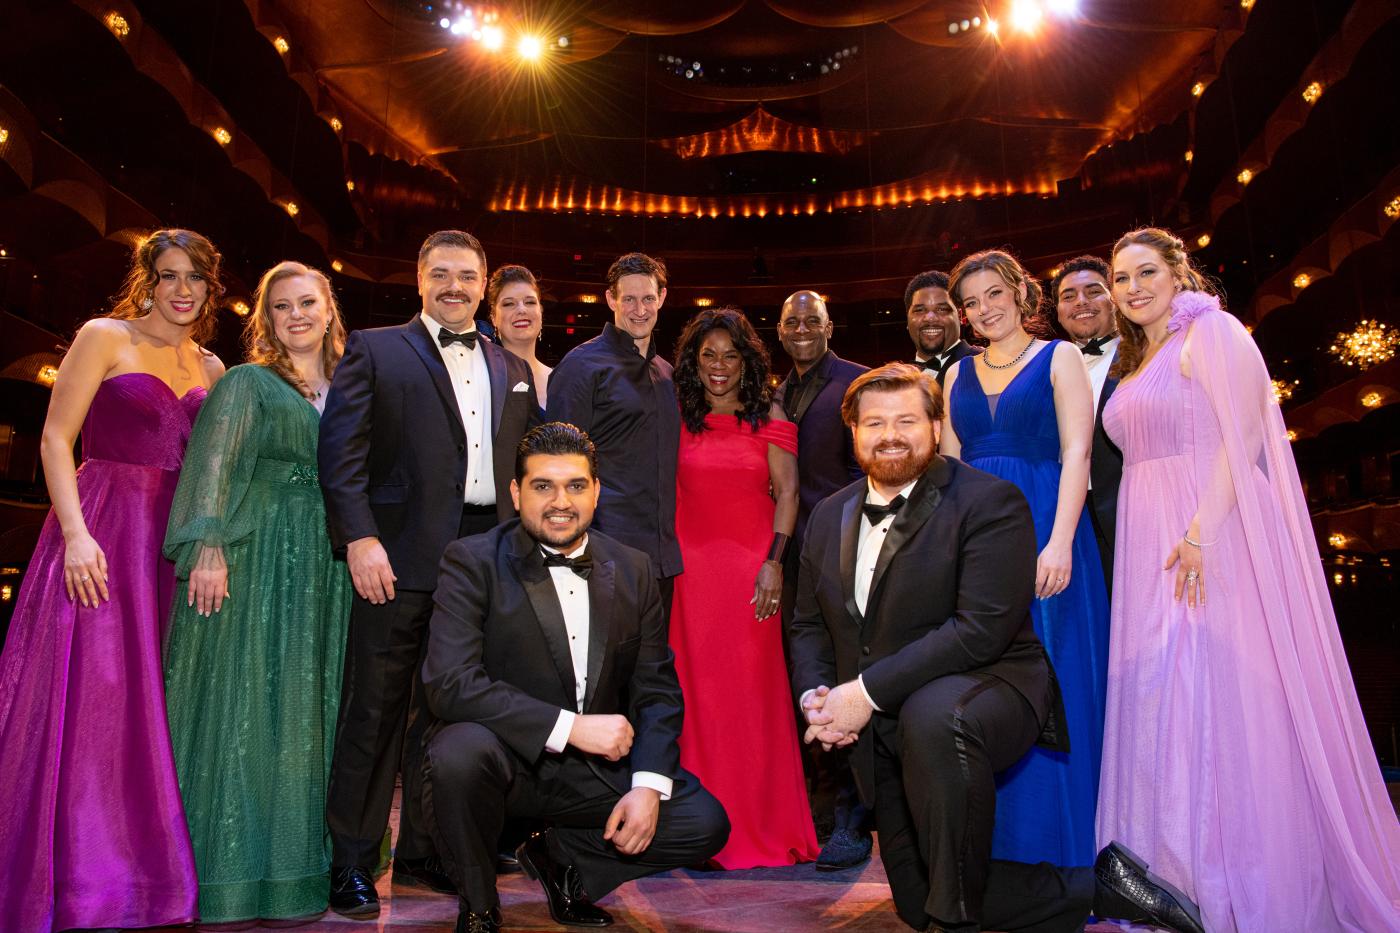 Back row L to R: Lydia Grindatto, Meridian Prall, Eric Taylor, Emily Richter, Mo. Evan Rogister, Denyce Graves, Ryan Speedo Green, Demetrious Sampson, Ruby Dibble, Daniel Espinal, Tessa McQueen, Front L to R: Navasard Hakobyan, Nathan Bowles Photo: Natalie Powers / Met Opera